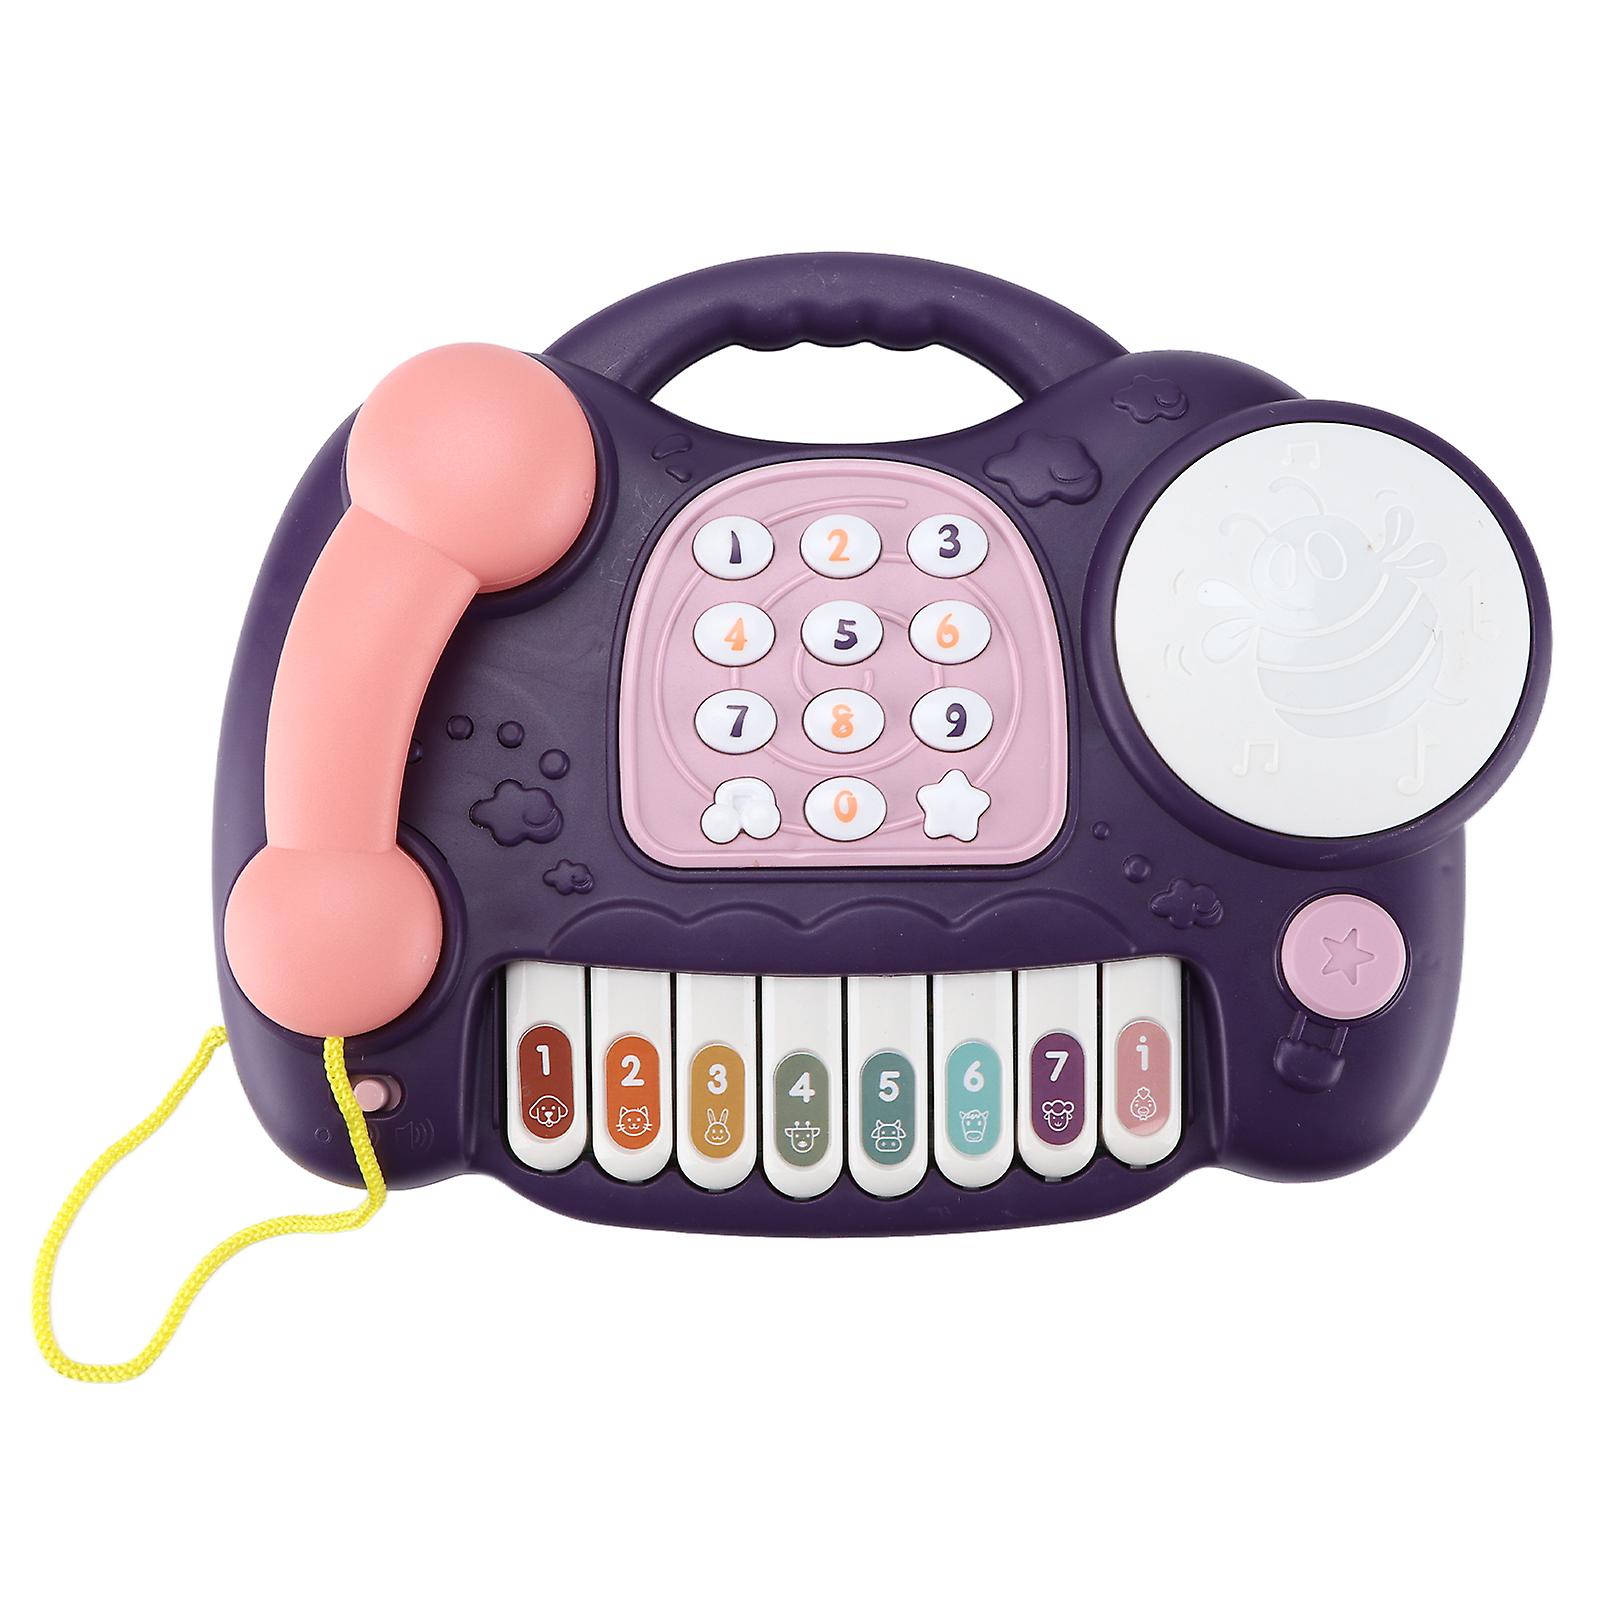 Telephone Toys 10 Learning Function Interactive Games Colorful Light Children's Music Learning Toyspurple